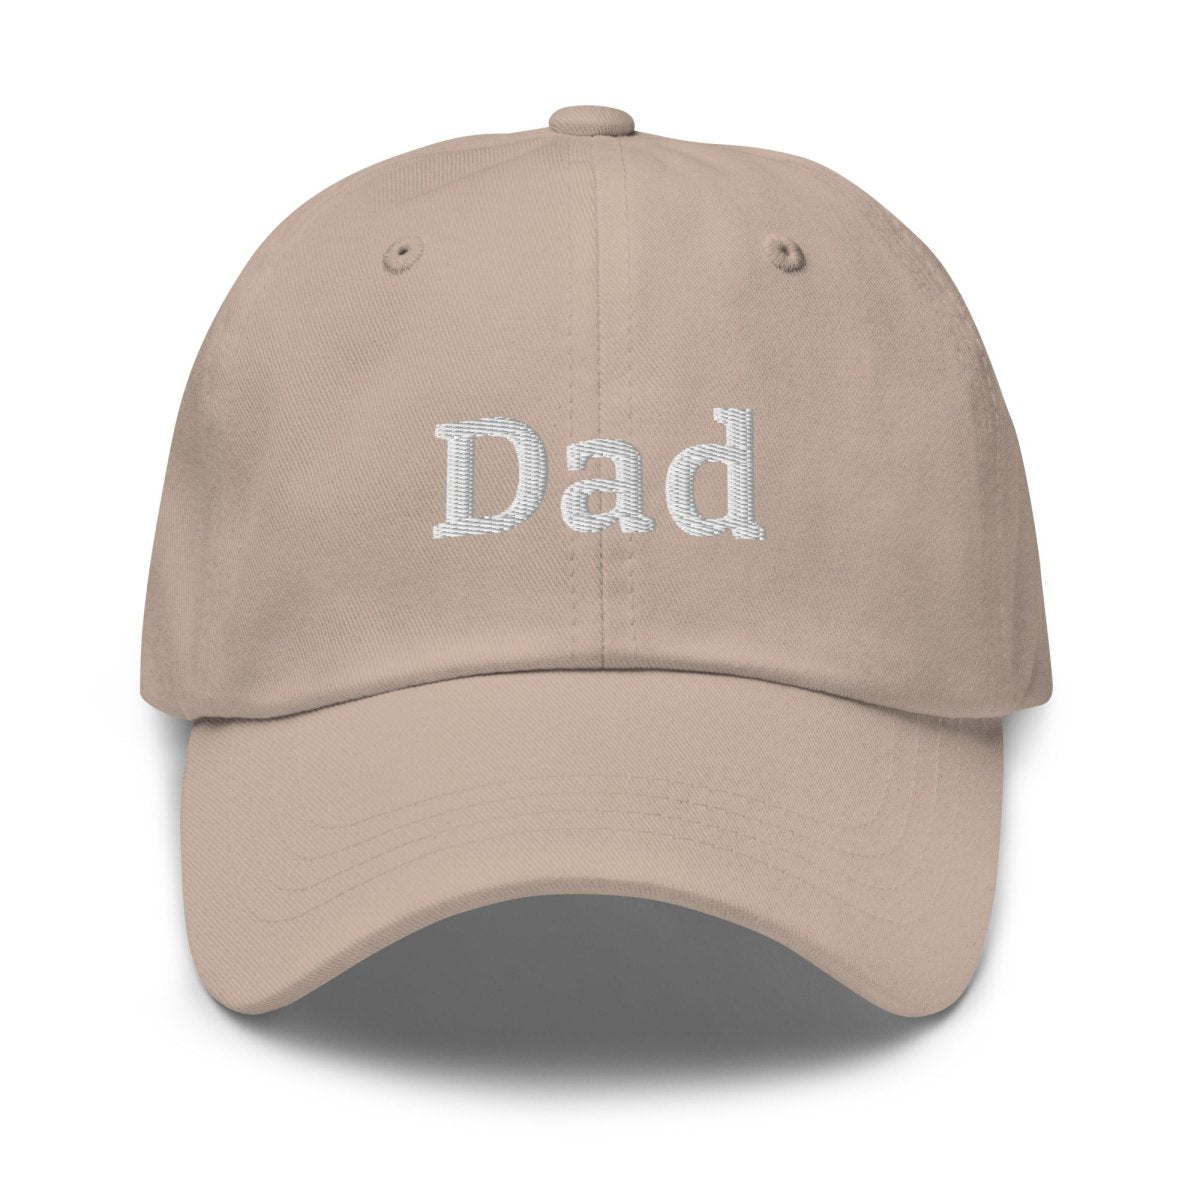 "Dad" Embroidered Cap - AI Store